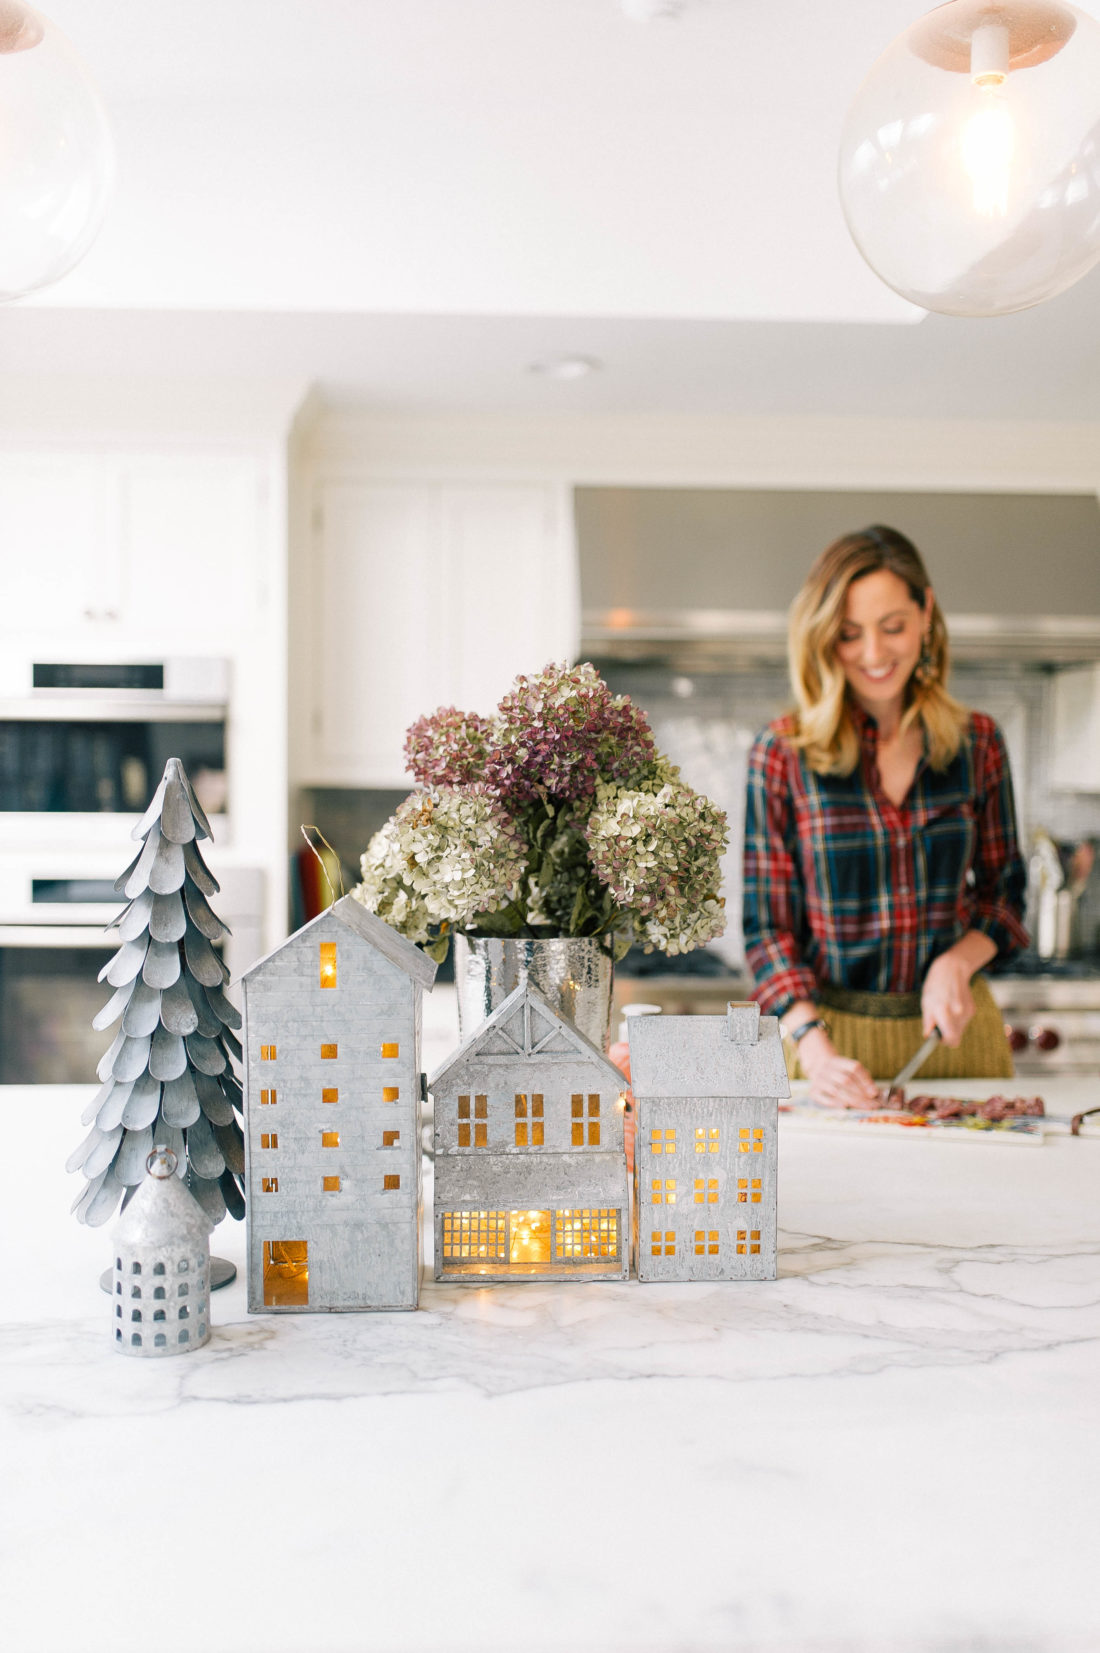 Eva Amurri Martino prepares lunch in her kitchen that is decorated for christmas with galvanized steel houses filled with twinkly lights